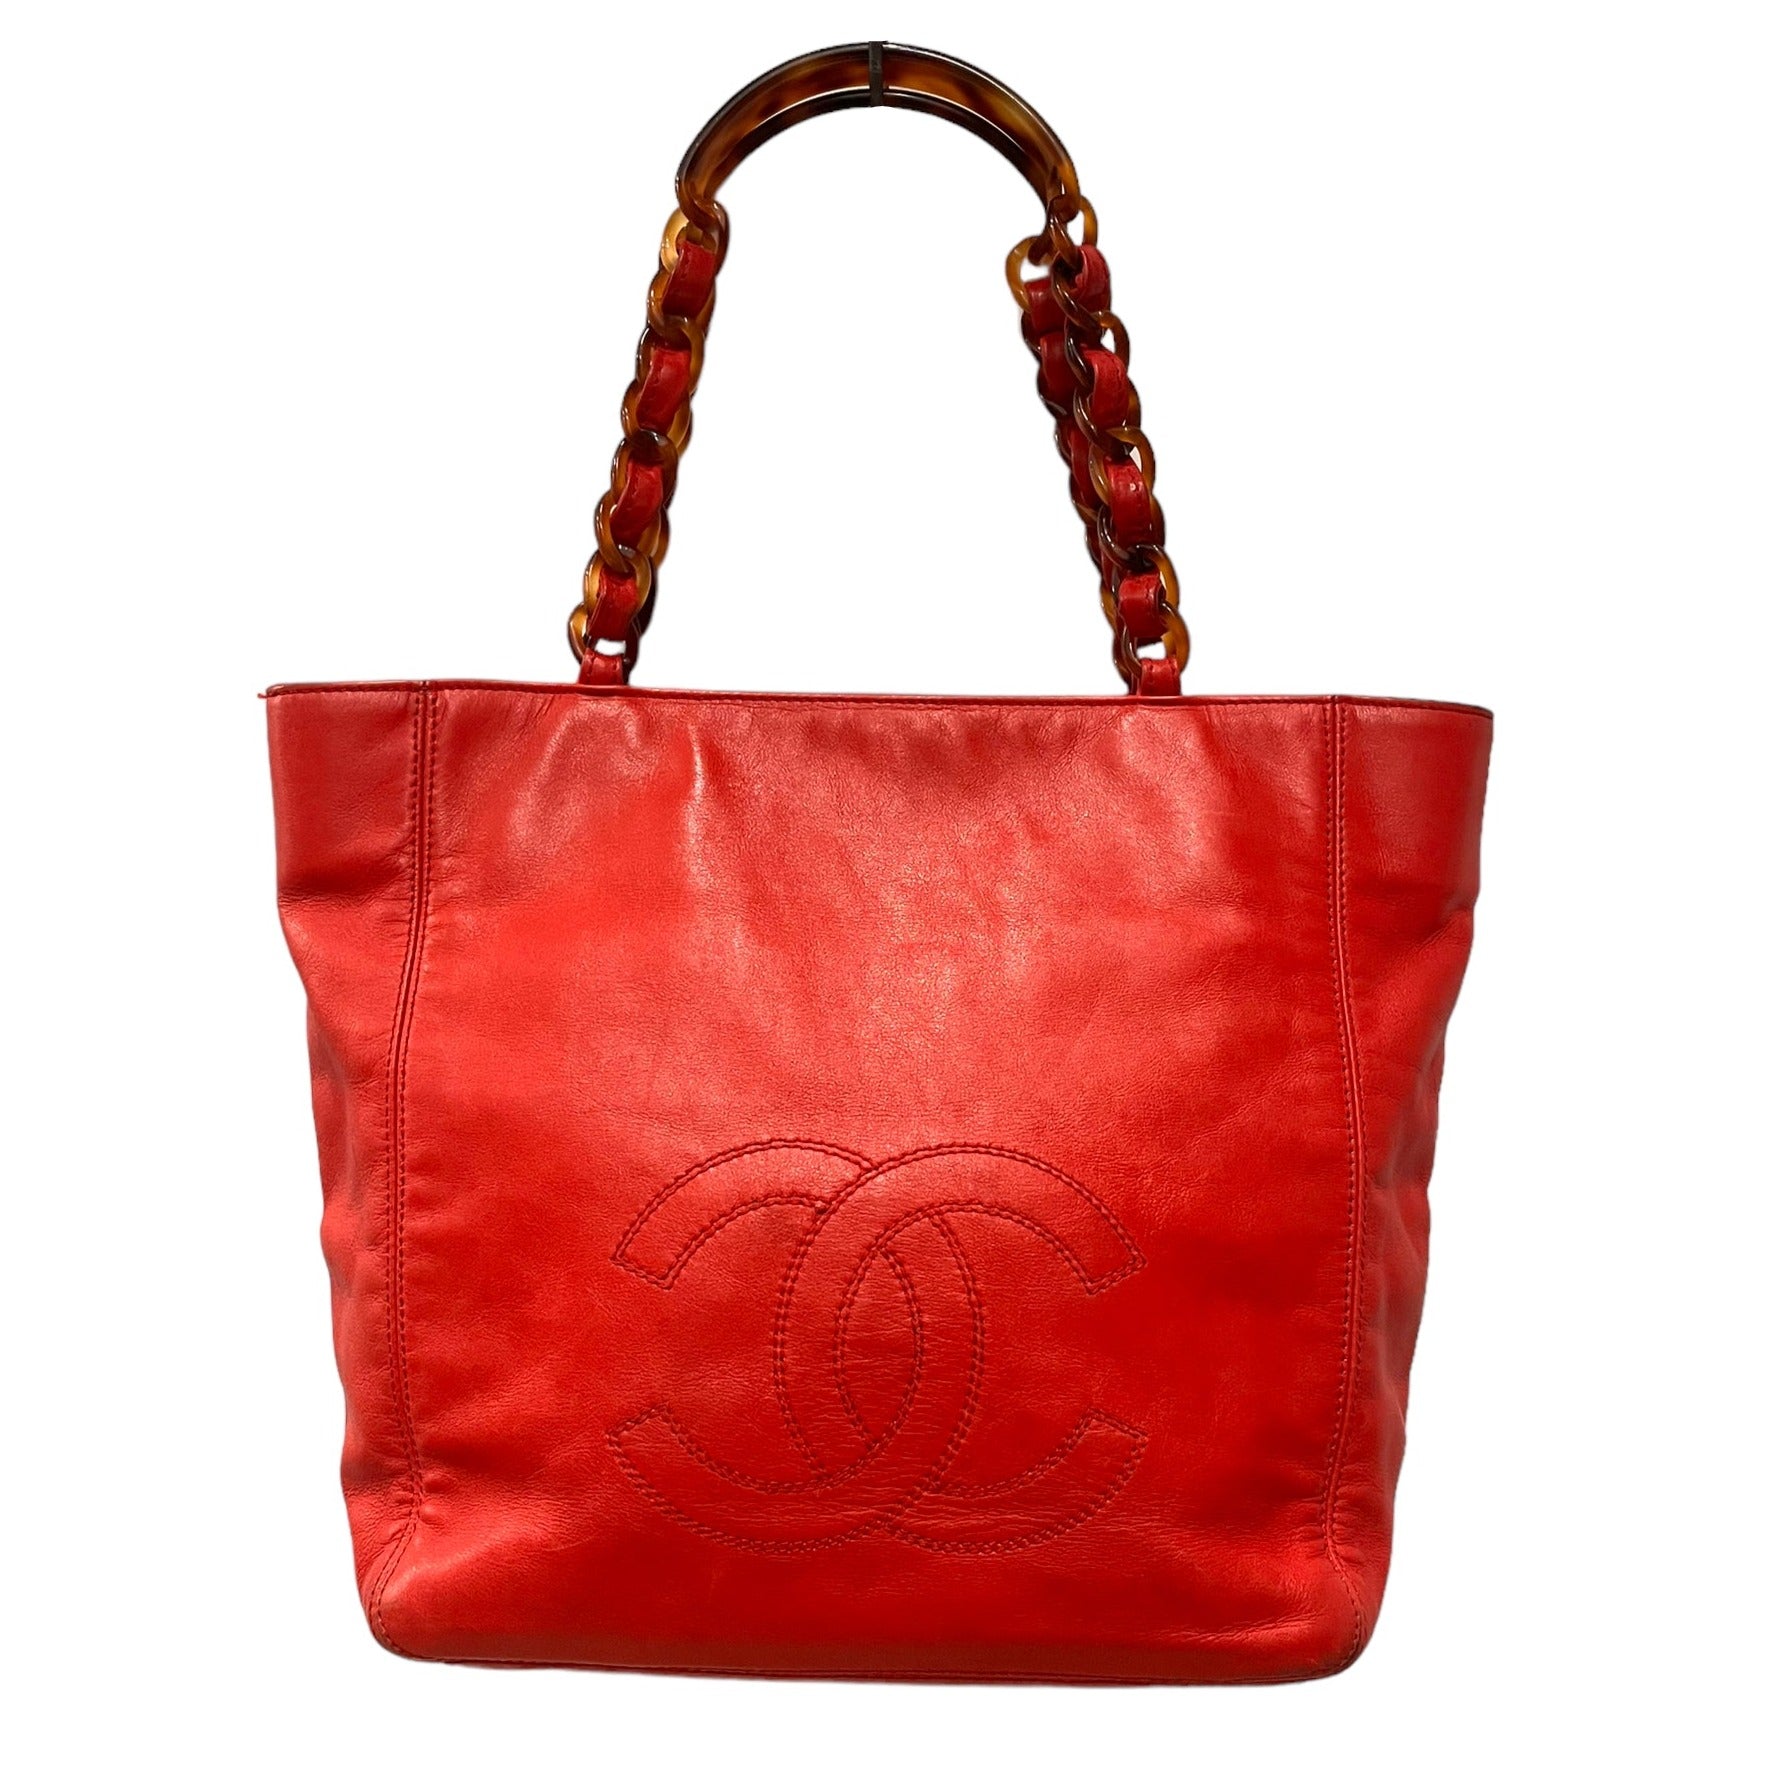 Chanel Red Tote Bag